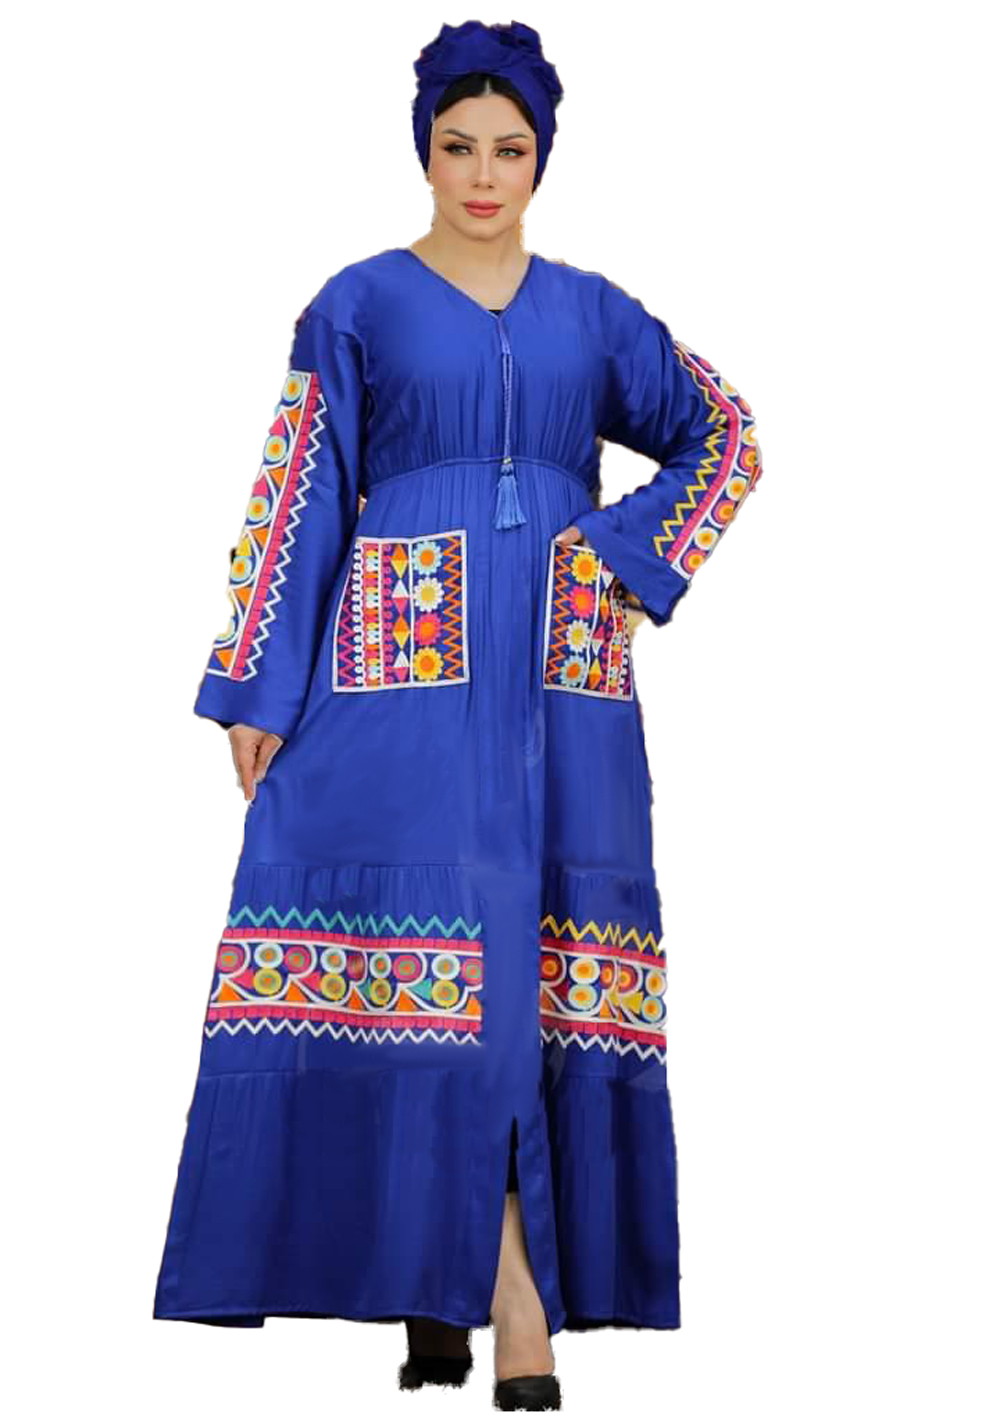 Abaya Sultan Two Pocket Embroidery For Women